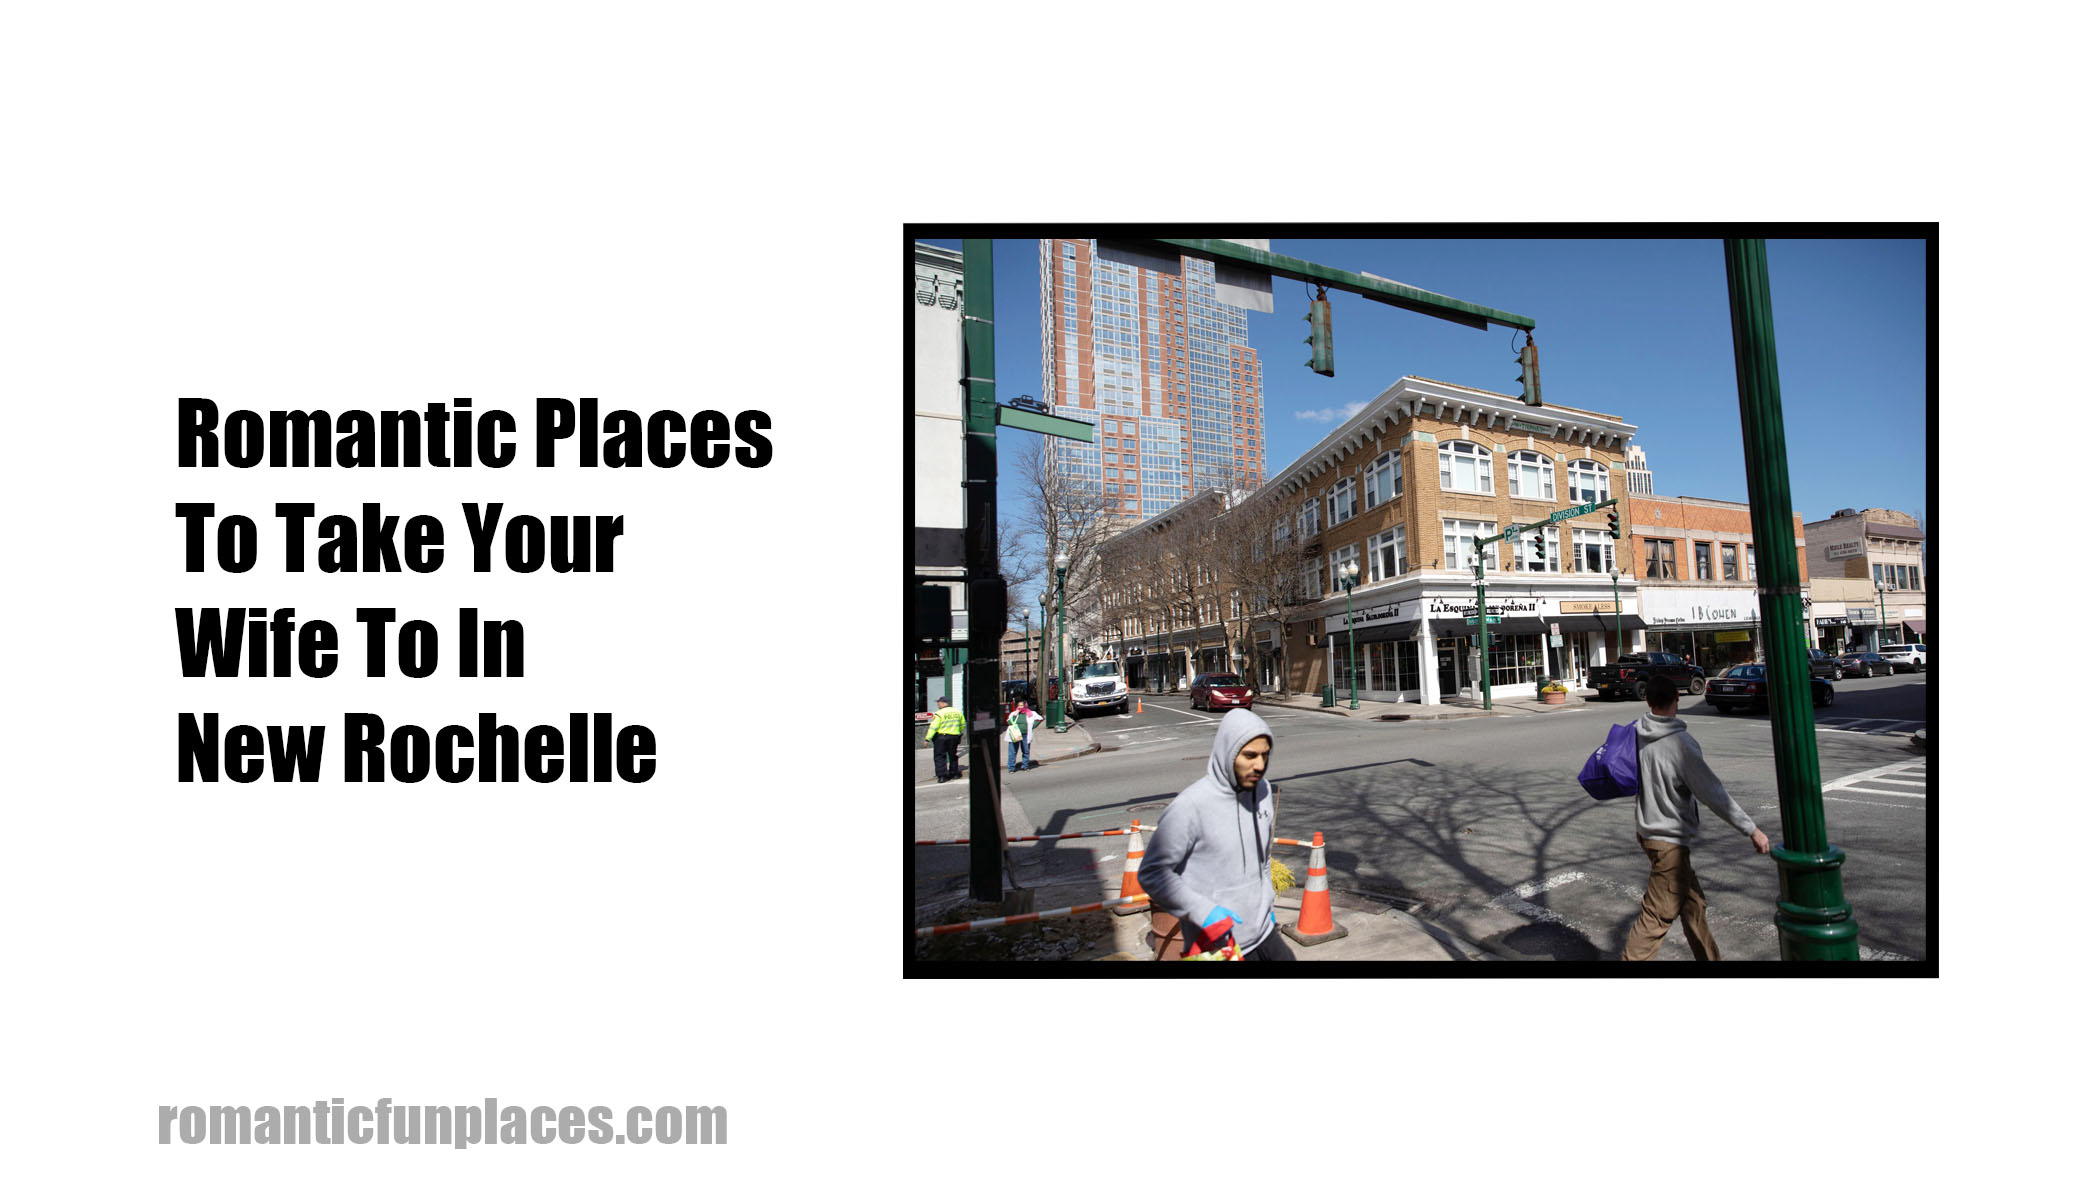 Romantic Places To Take Your Wife To In New Rochelle